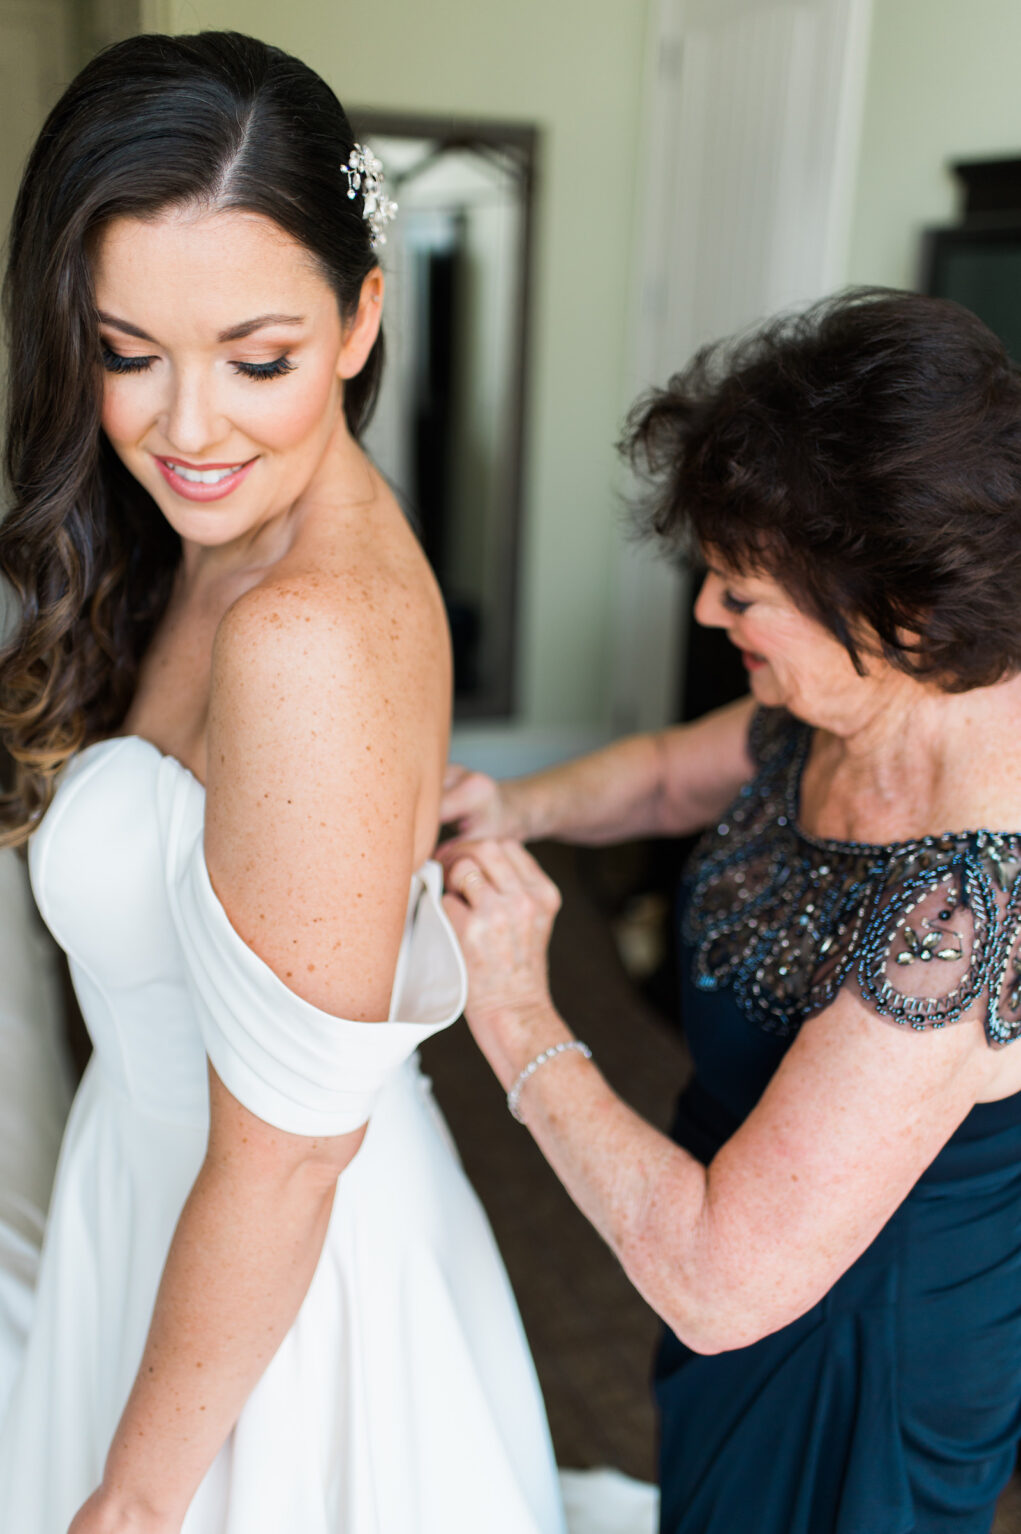 Classic Florida Wedding Attire, Tampa Bay Bride with Mother Wearing Stella York White Off the Should Wedding Dress with Crystal Hair Accessory and Pearl Teardrop Earrings